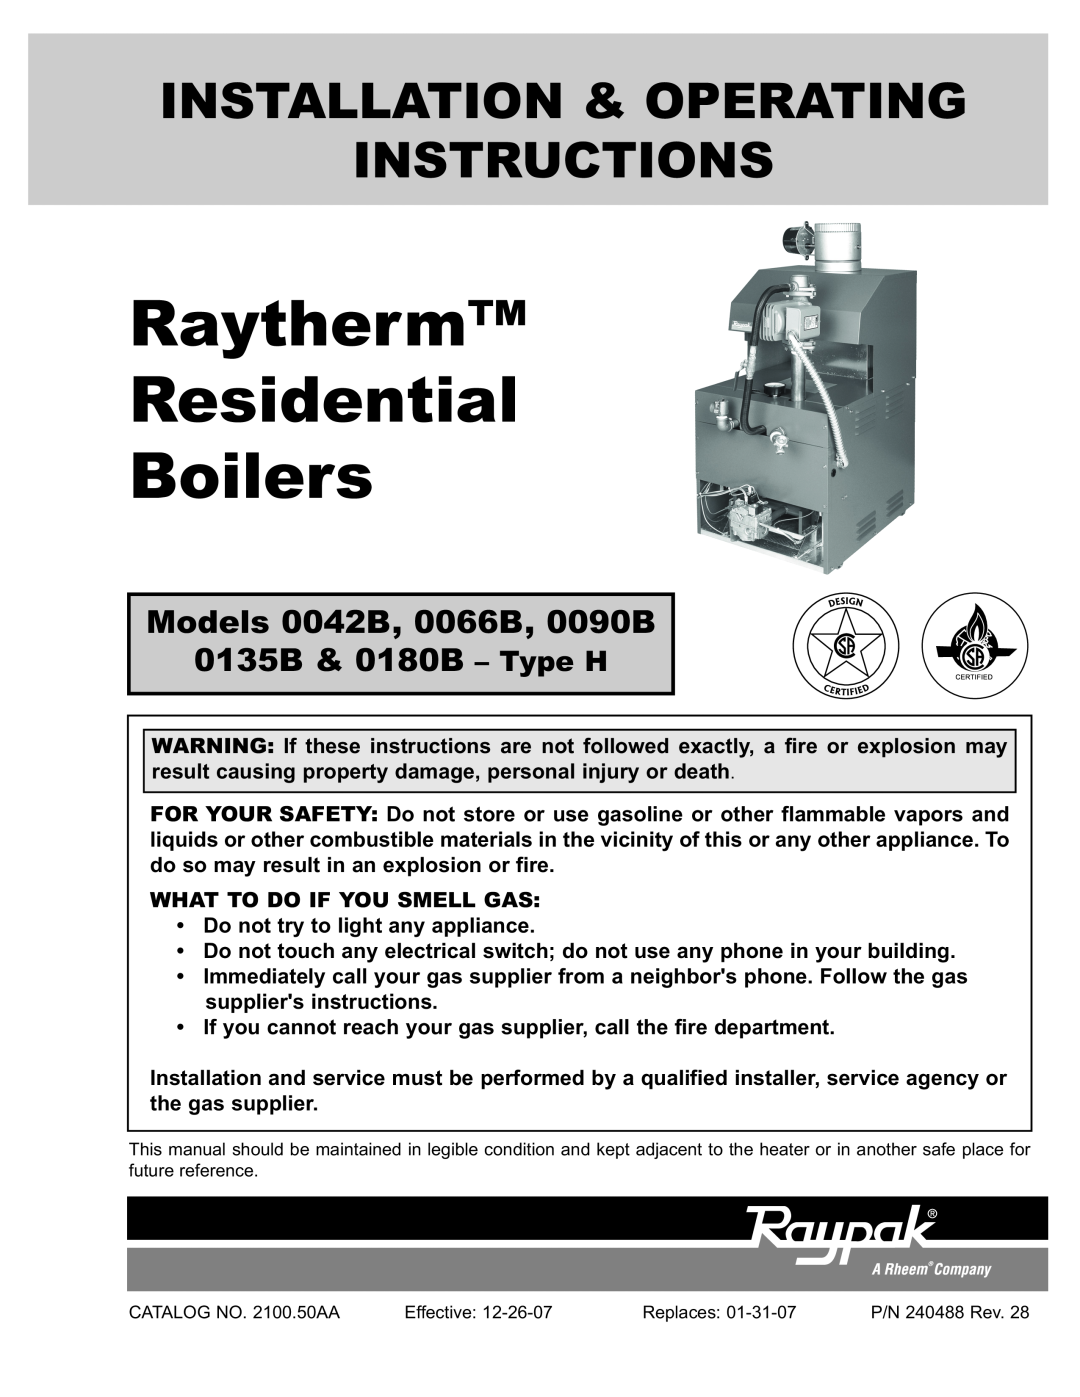 Raypak 0180B Type H manual Models 0042B, 0066B, 0090B 0135B & 0180B - Type H, What To Do If You Smell Gas 